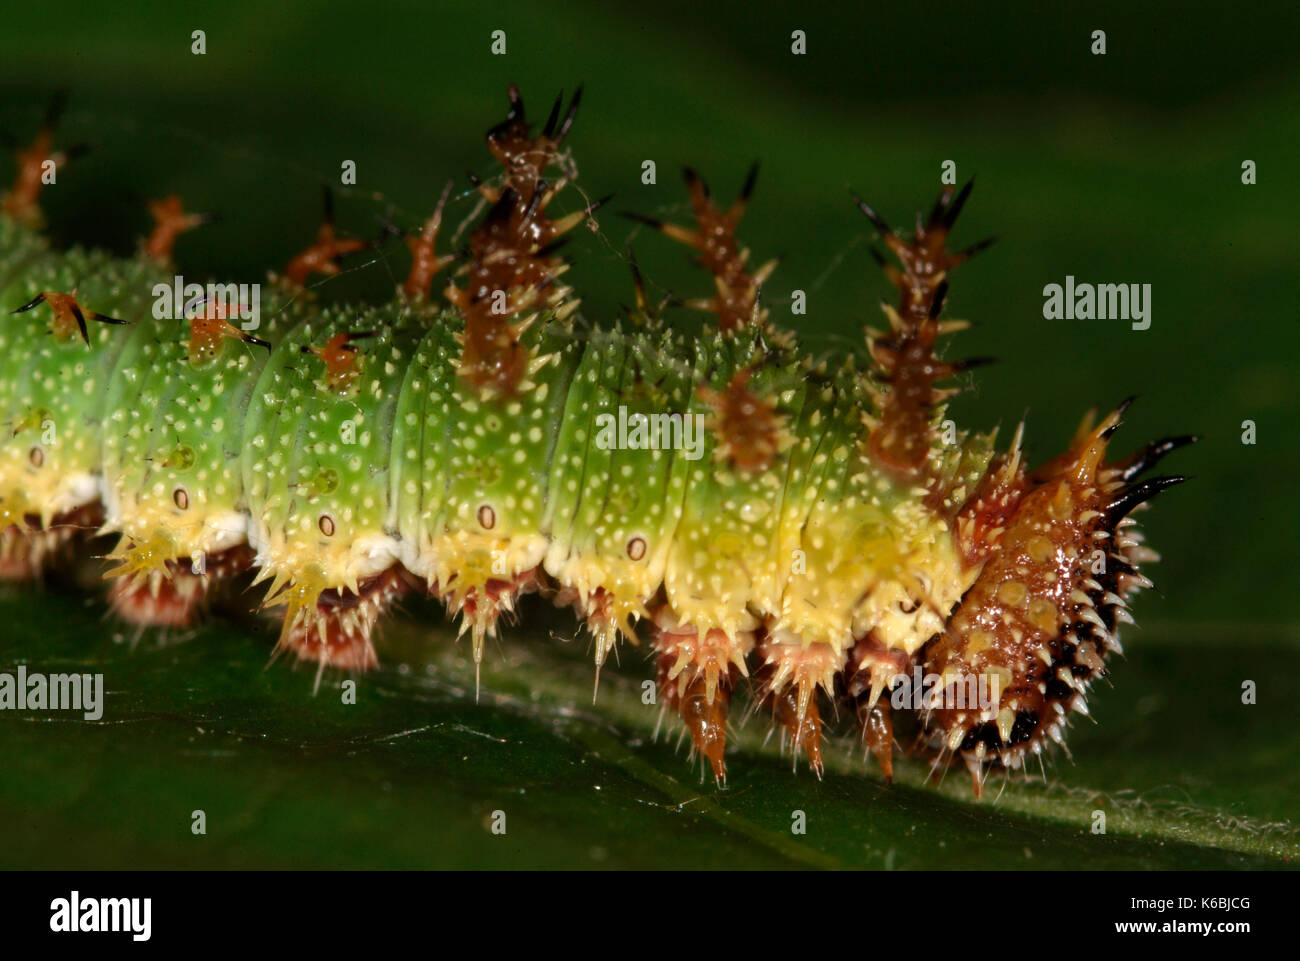 White Admiral Butterfly Caterpillar, Larvae, Ladoga camilla, side view showing spines, spiny, feeds on honeysuckle, foodplant, green, hairy, found in  Stock Photo